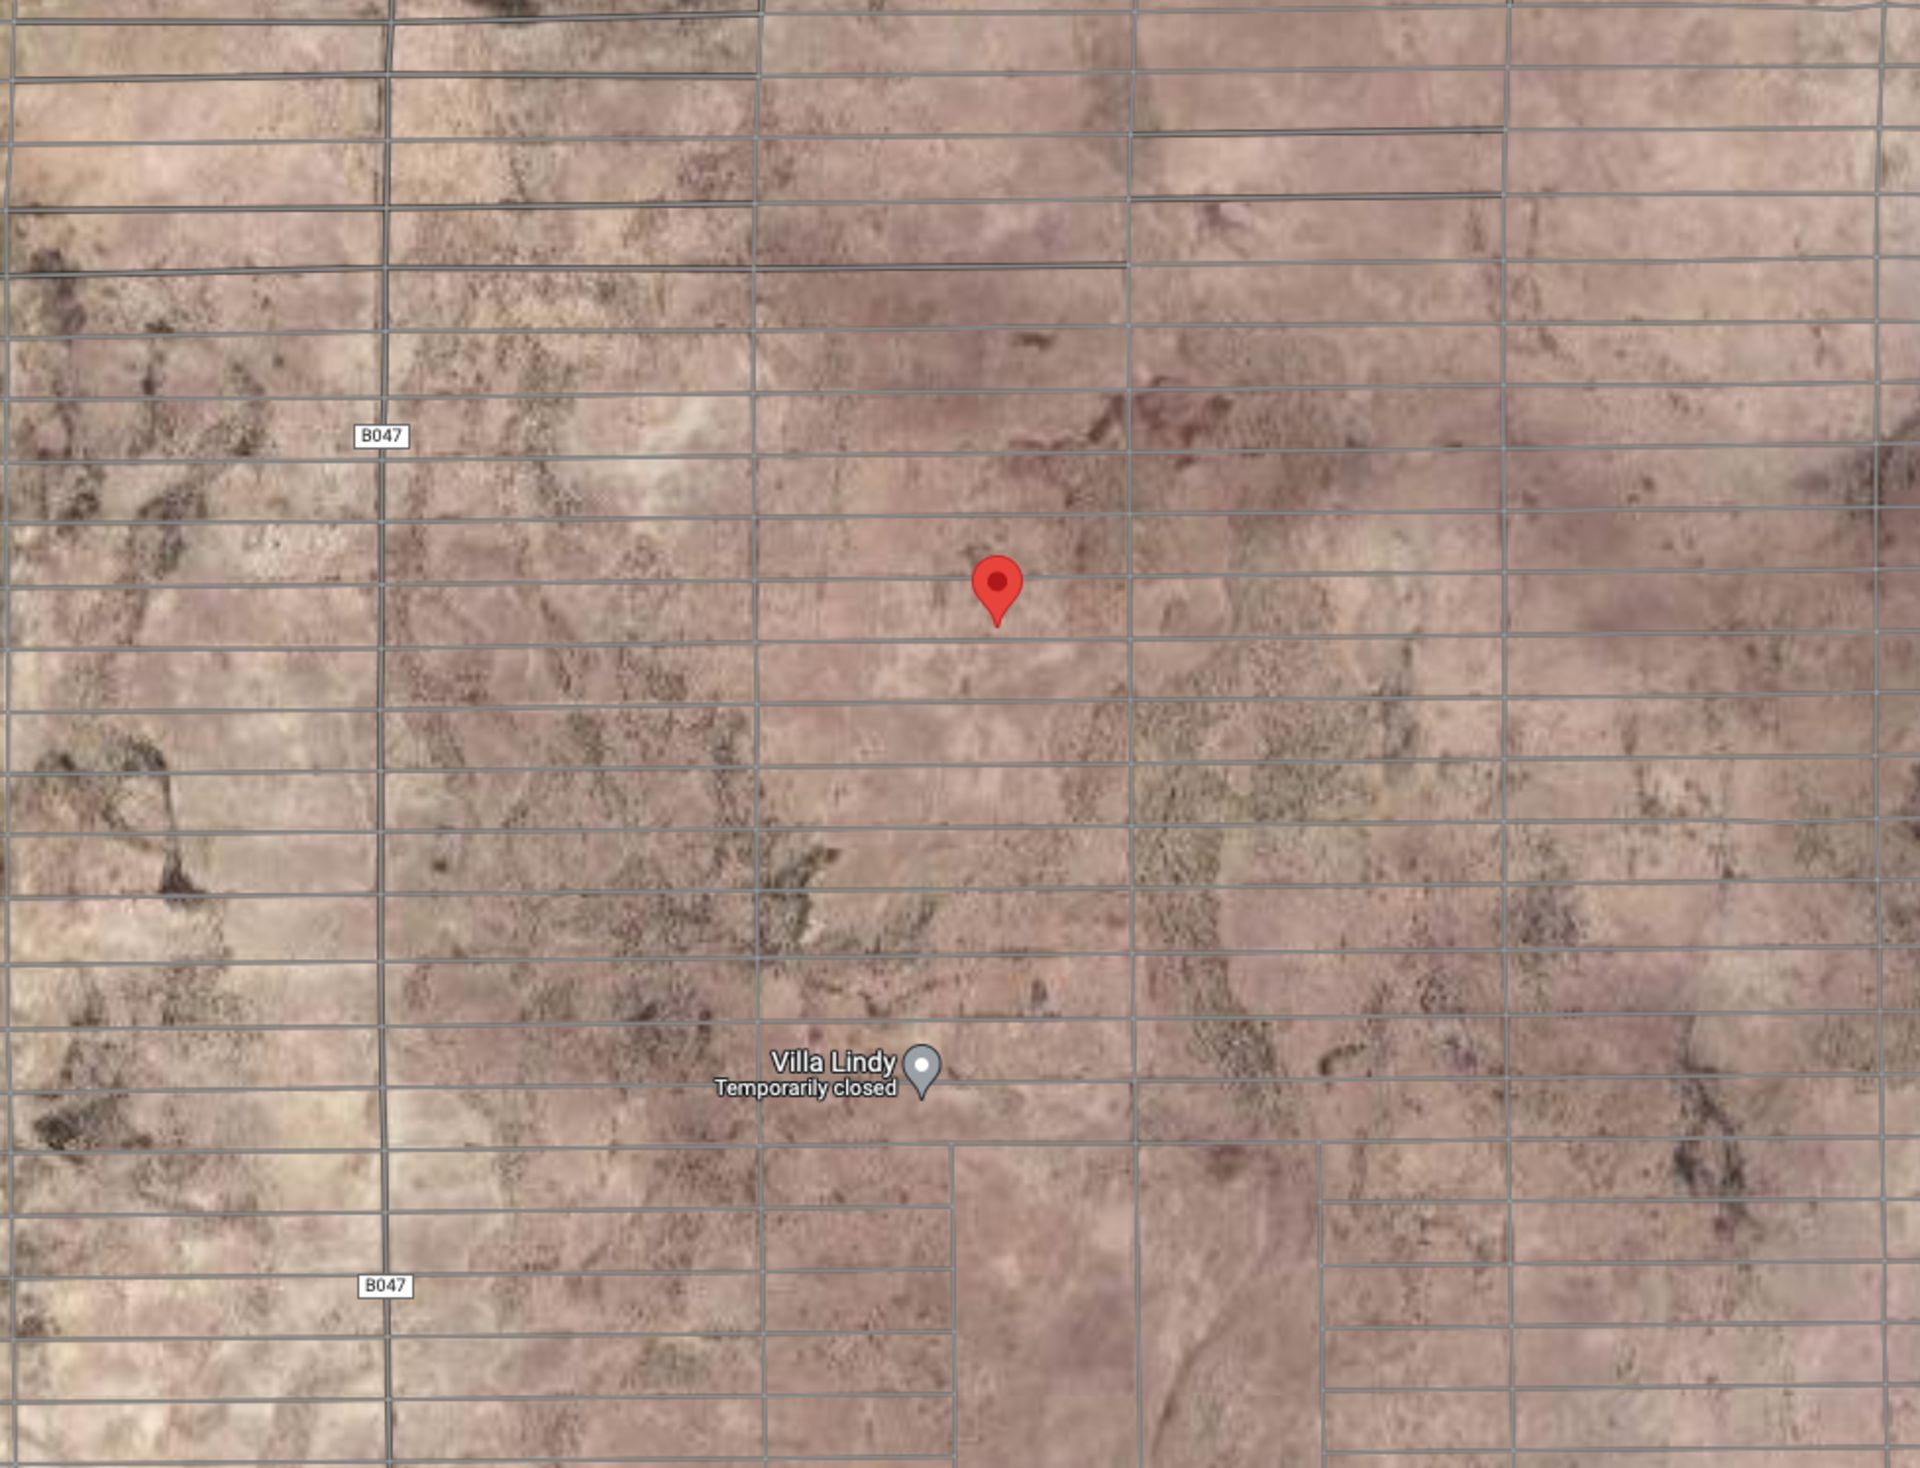 Grab This Half-Acre Lot in Luna County, New Mexico! - Image 12 of 14